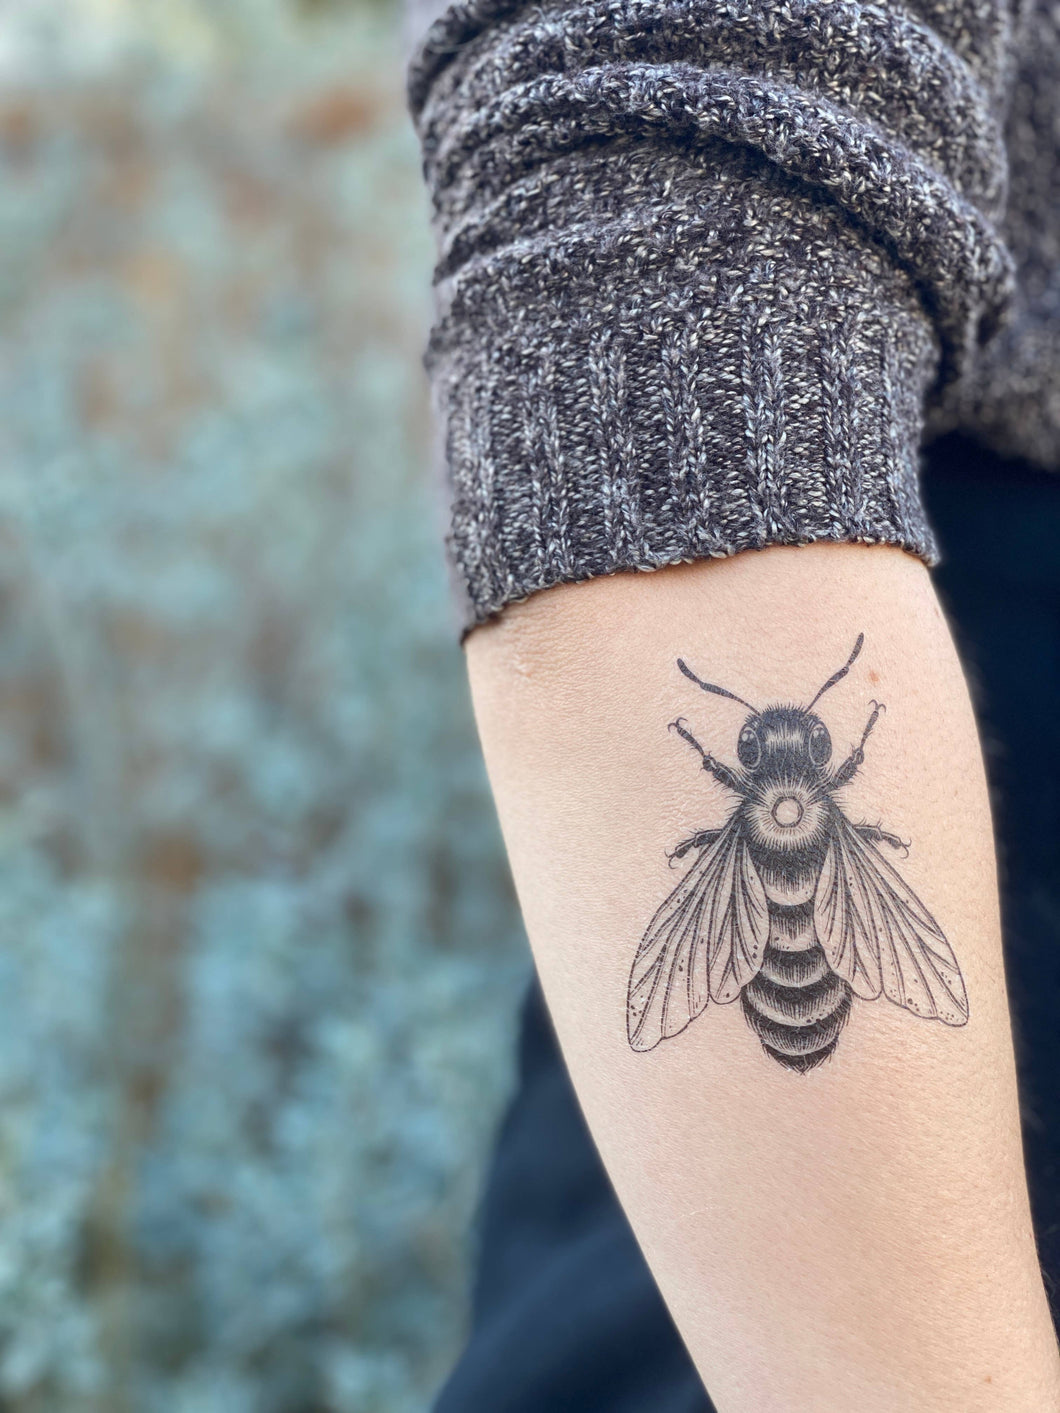 Big bee temporary tattoo, original design, hand-drawn in black lines. This familiar pollinator and beloved insect represents spring and productivity to many people. What does the bee represent to you?